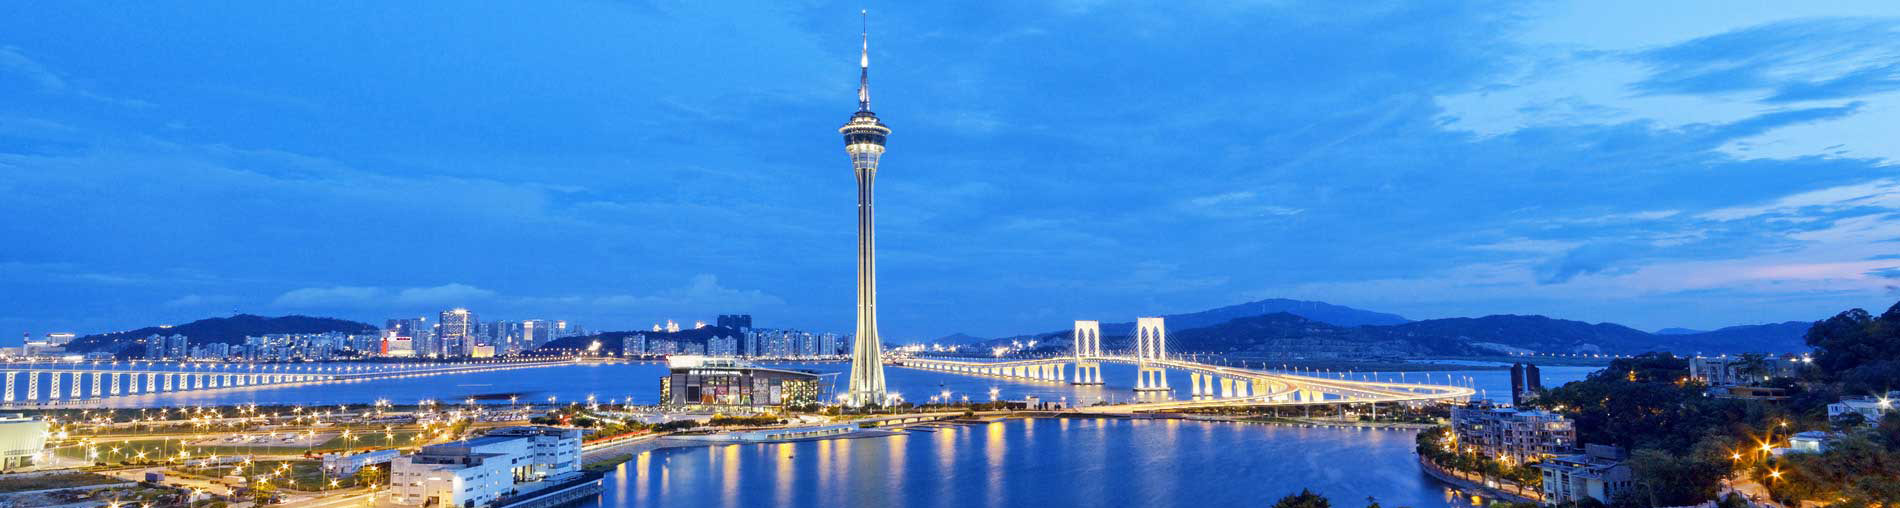 Most Popular Macau Tour Packages